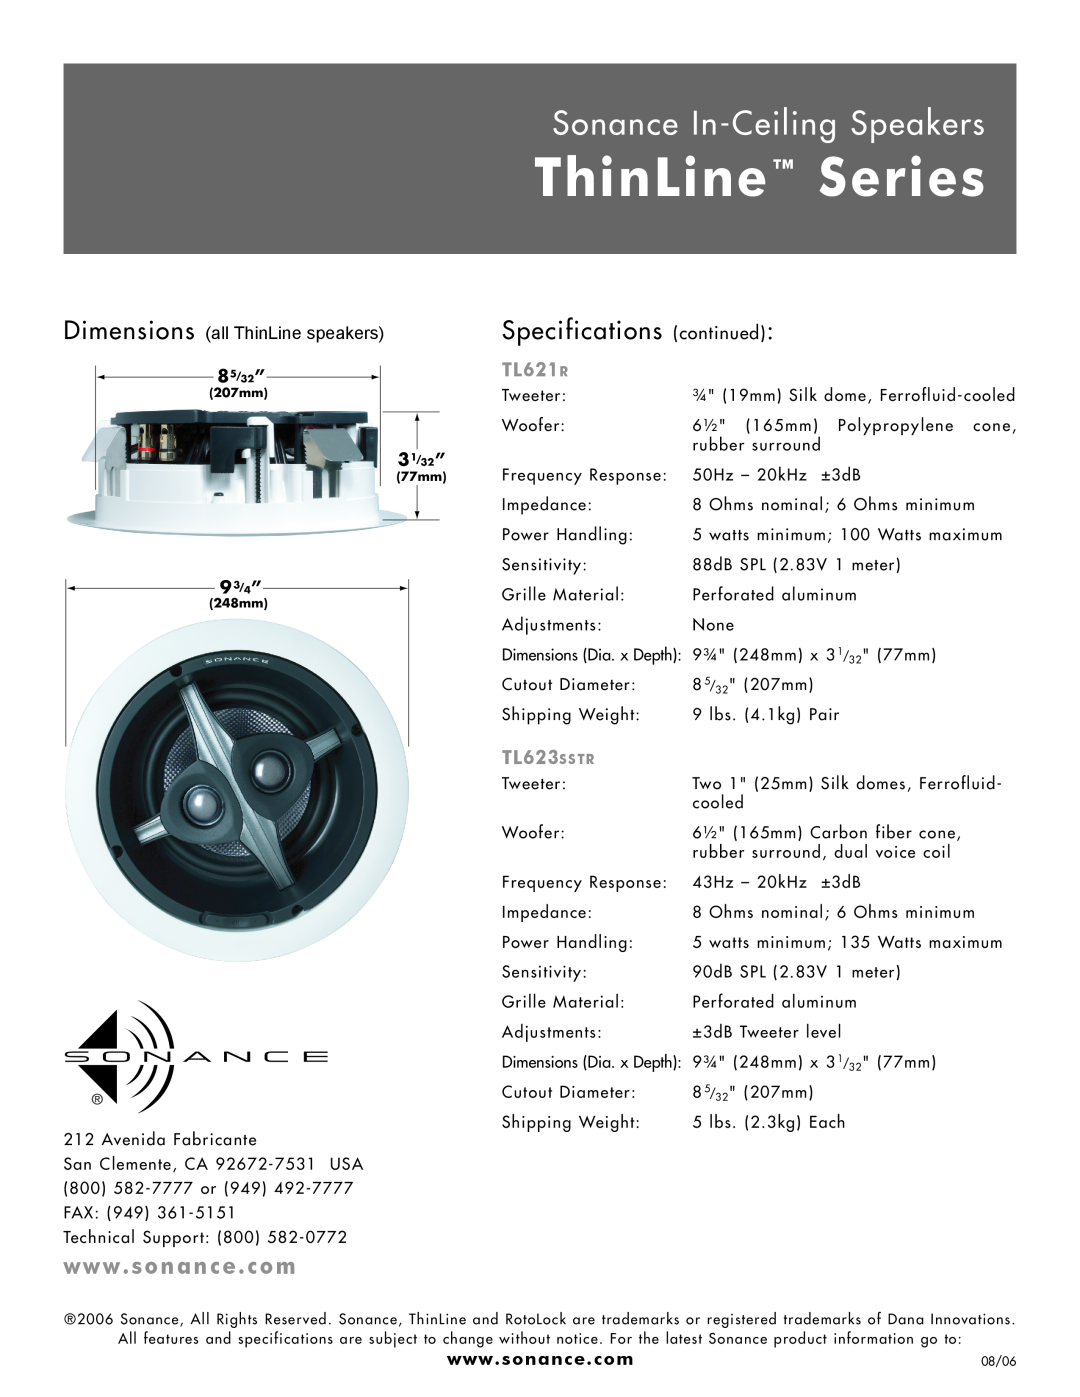 Sonance TL622R Specifications continued, TL621R, TL623SSTR, Dimensions all ThinLine speakers, ThinLine Series, 93/4” 